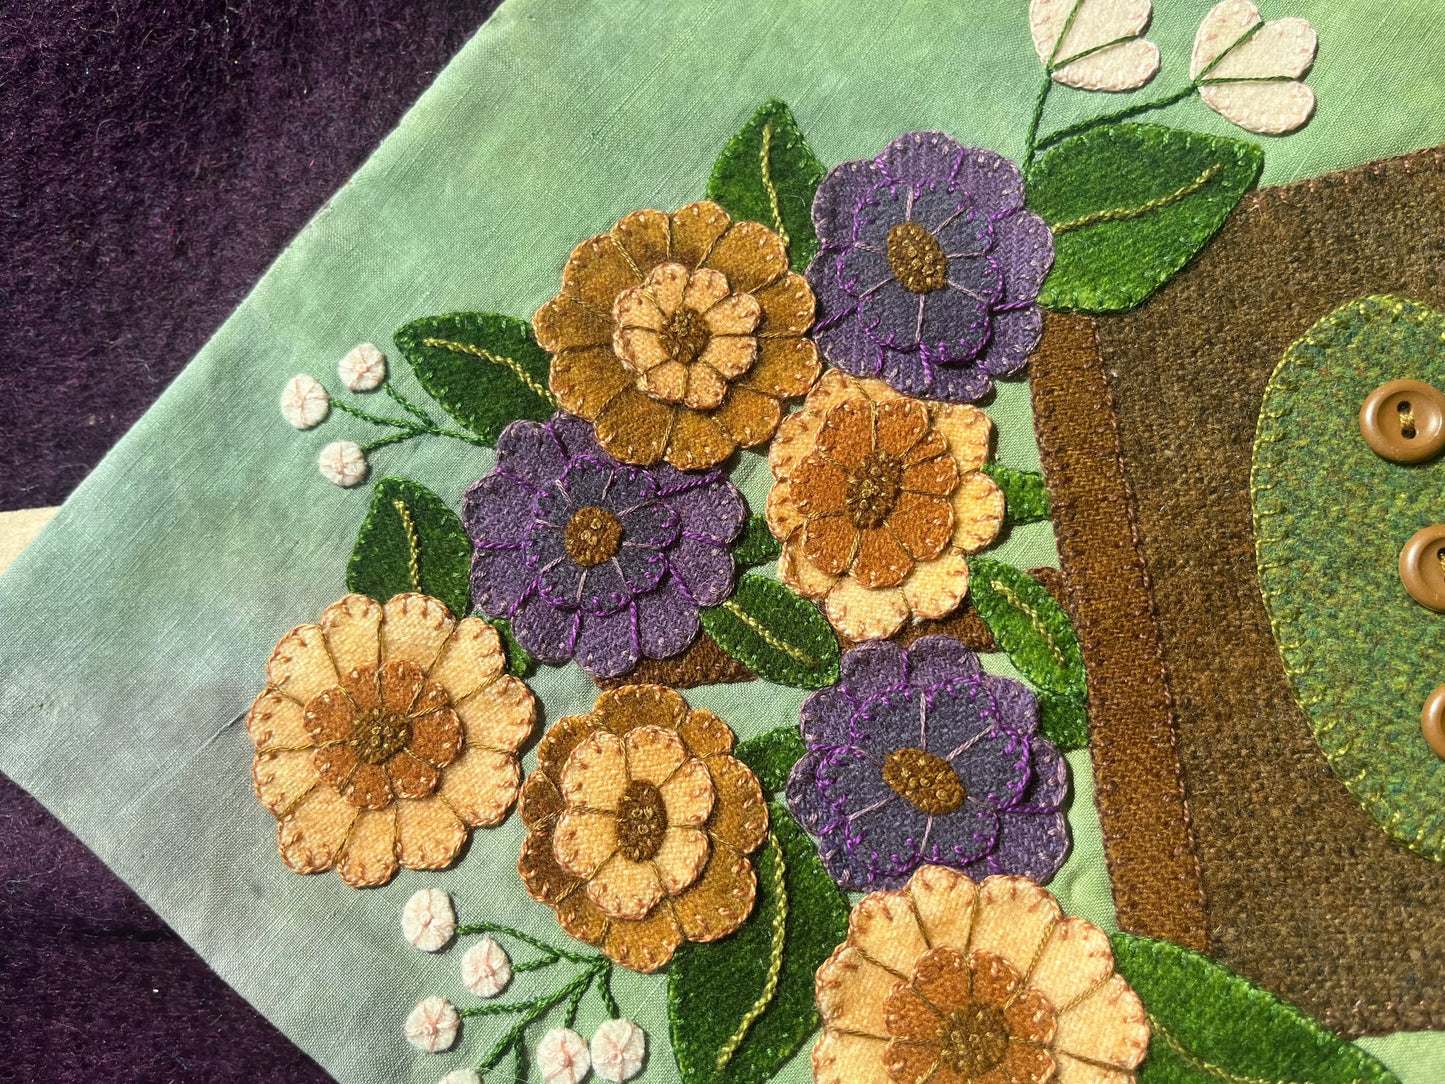 Applique Art Piece with Flowers in Basket